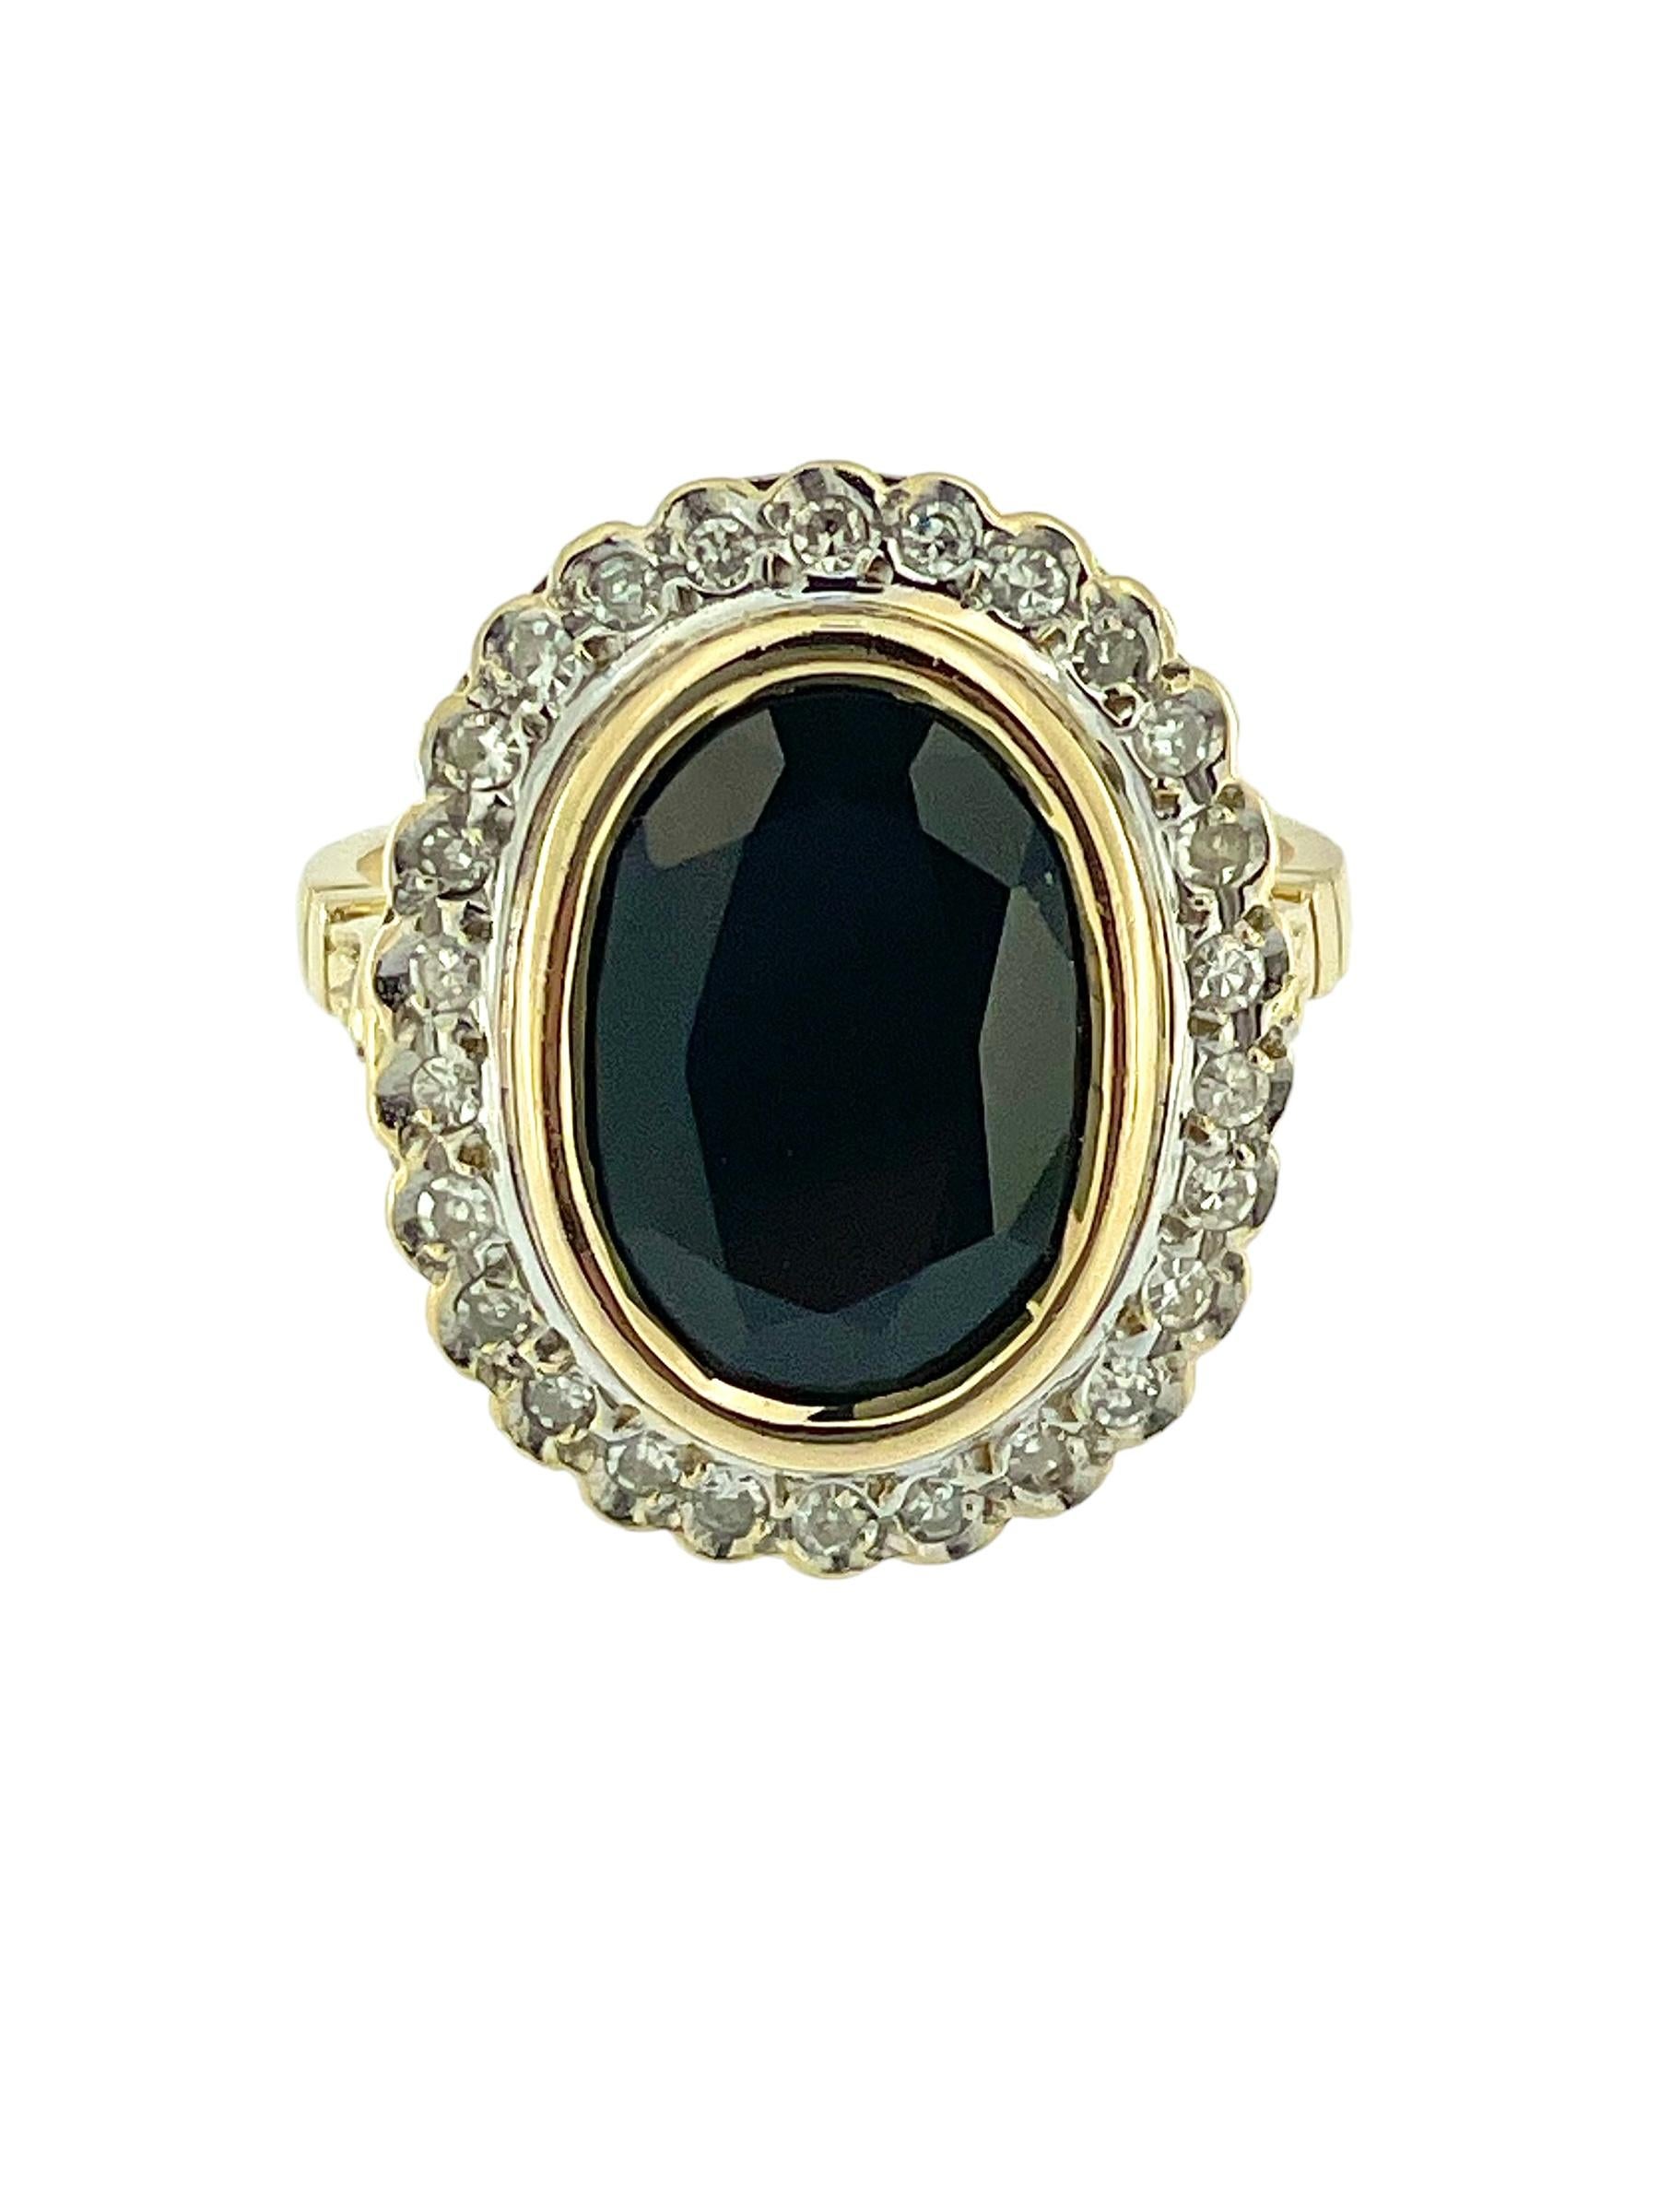 This Art Deco Cocktail Gold Ring is a magnificent statement piece that exudes luxury and sophistication. Crafted in the iconic French style, it embodies the timeless elegance and exquisite craftsmanship synonymous with Art Deco French jewelry